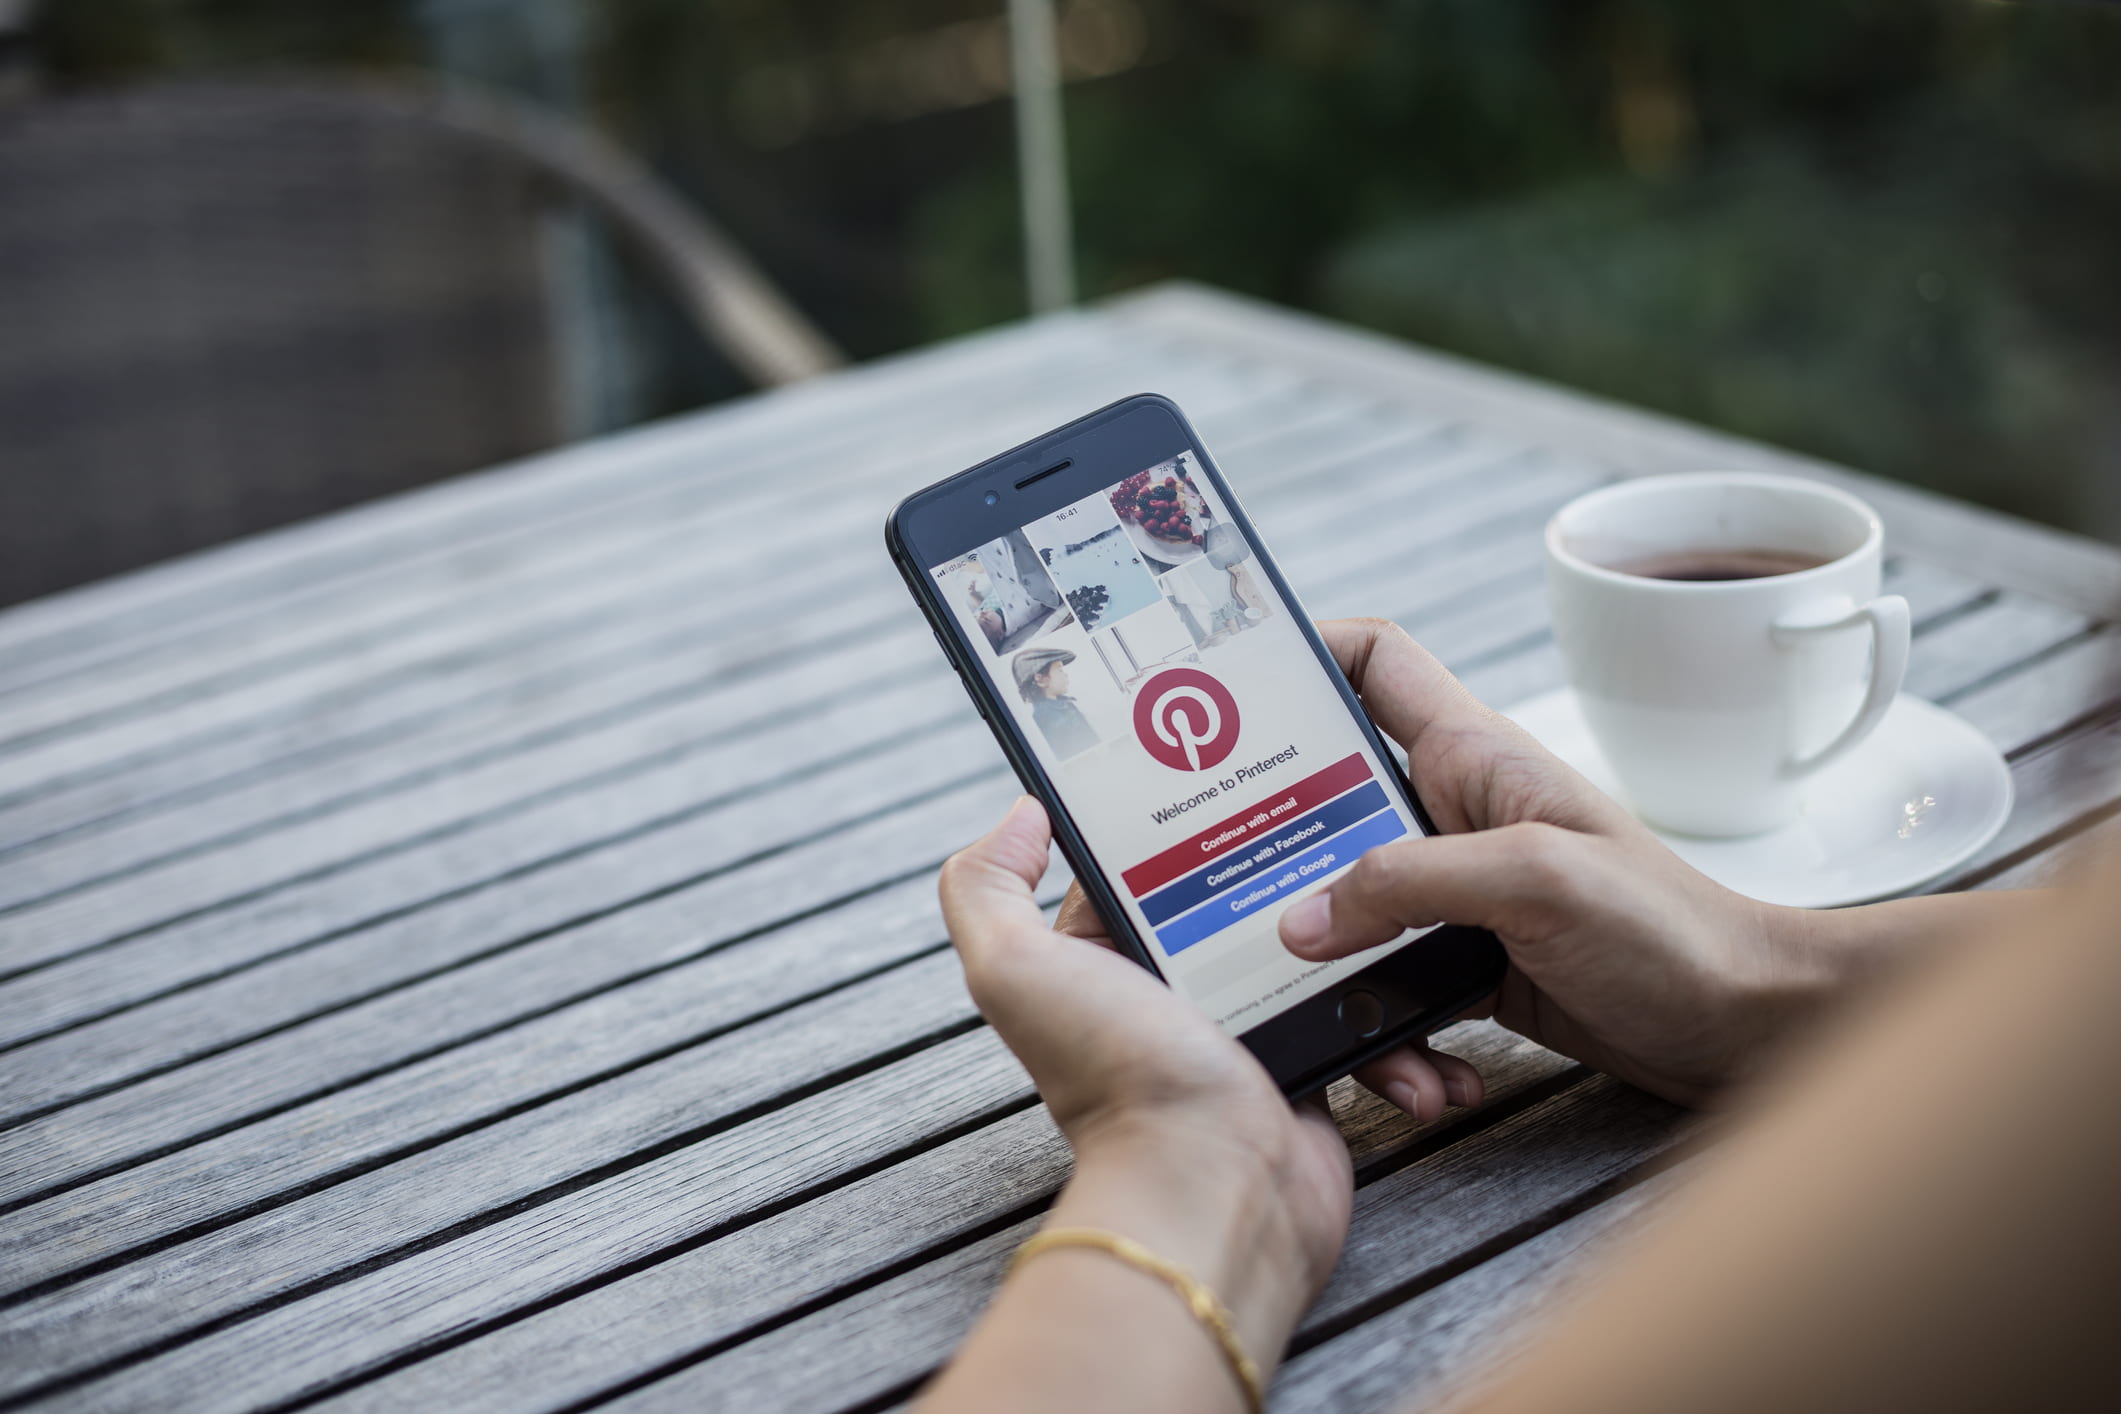 8 SEO Benefits of Pinterest in your Web Presence